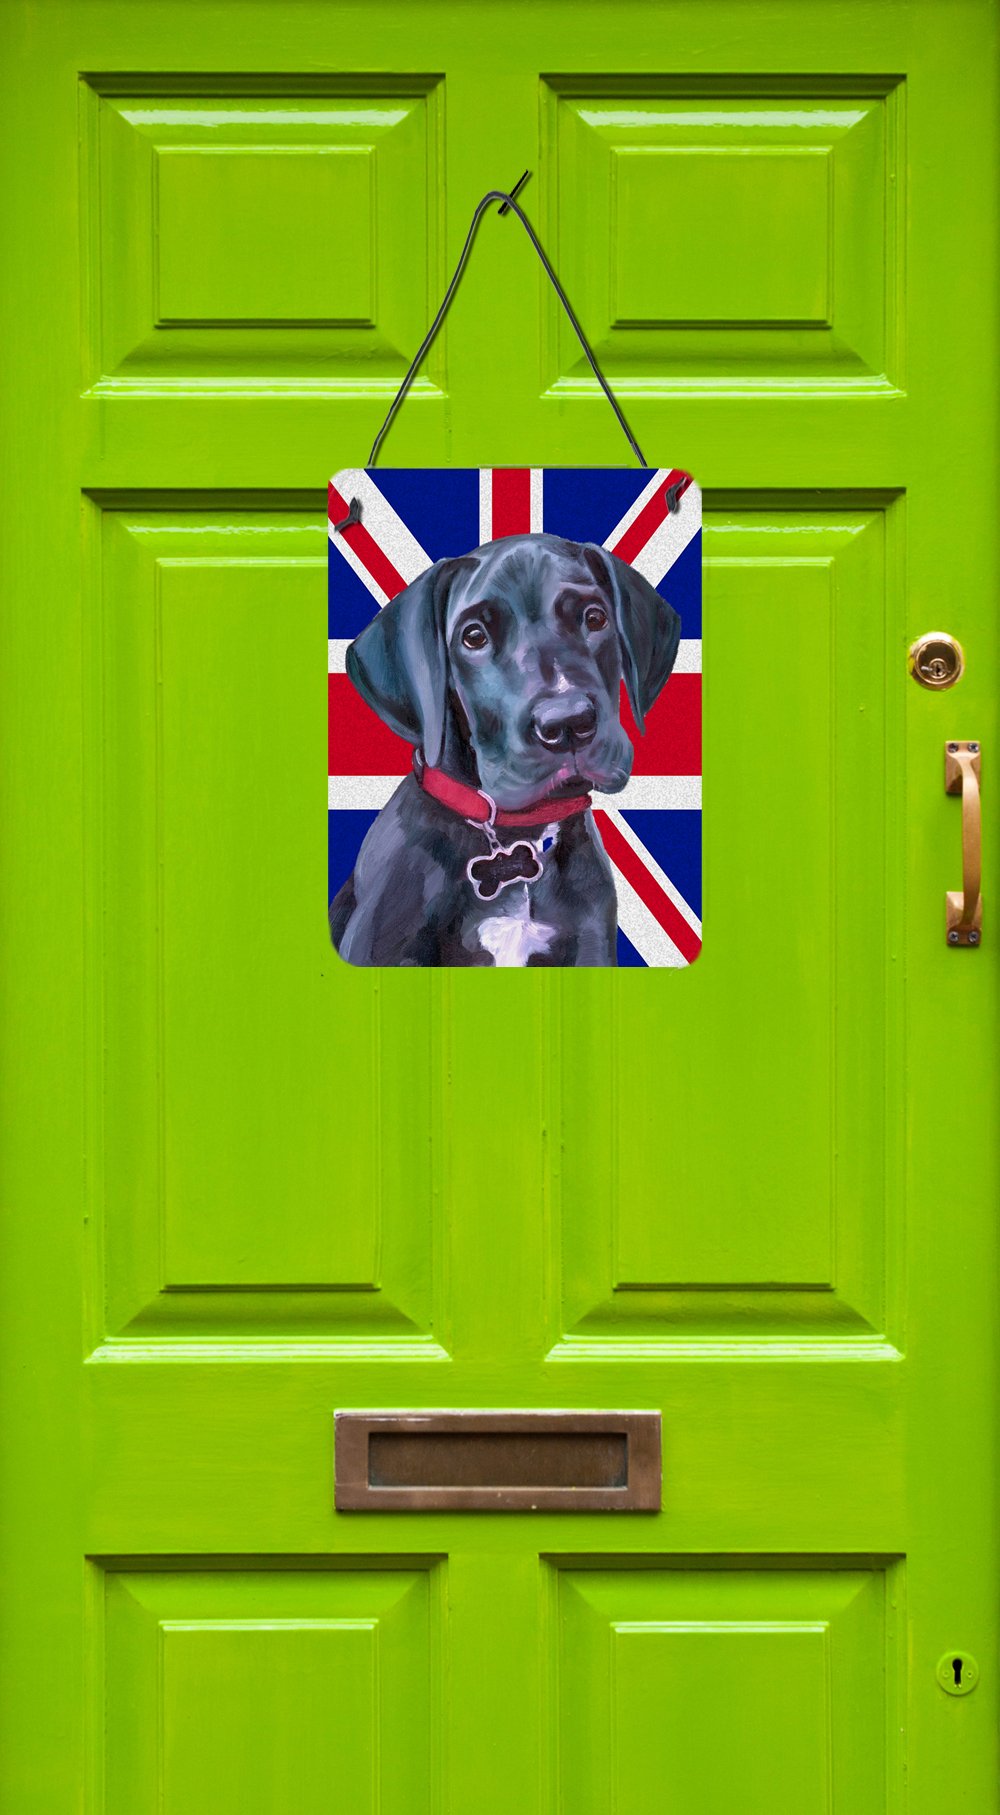 Black Great Dane Puppy with English Union Jack British Flag Wall or Door Hanging Prints LH9600DS1216 by Caroline's Treasures